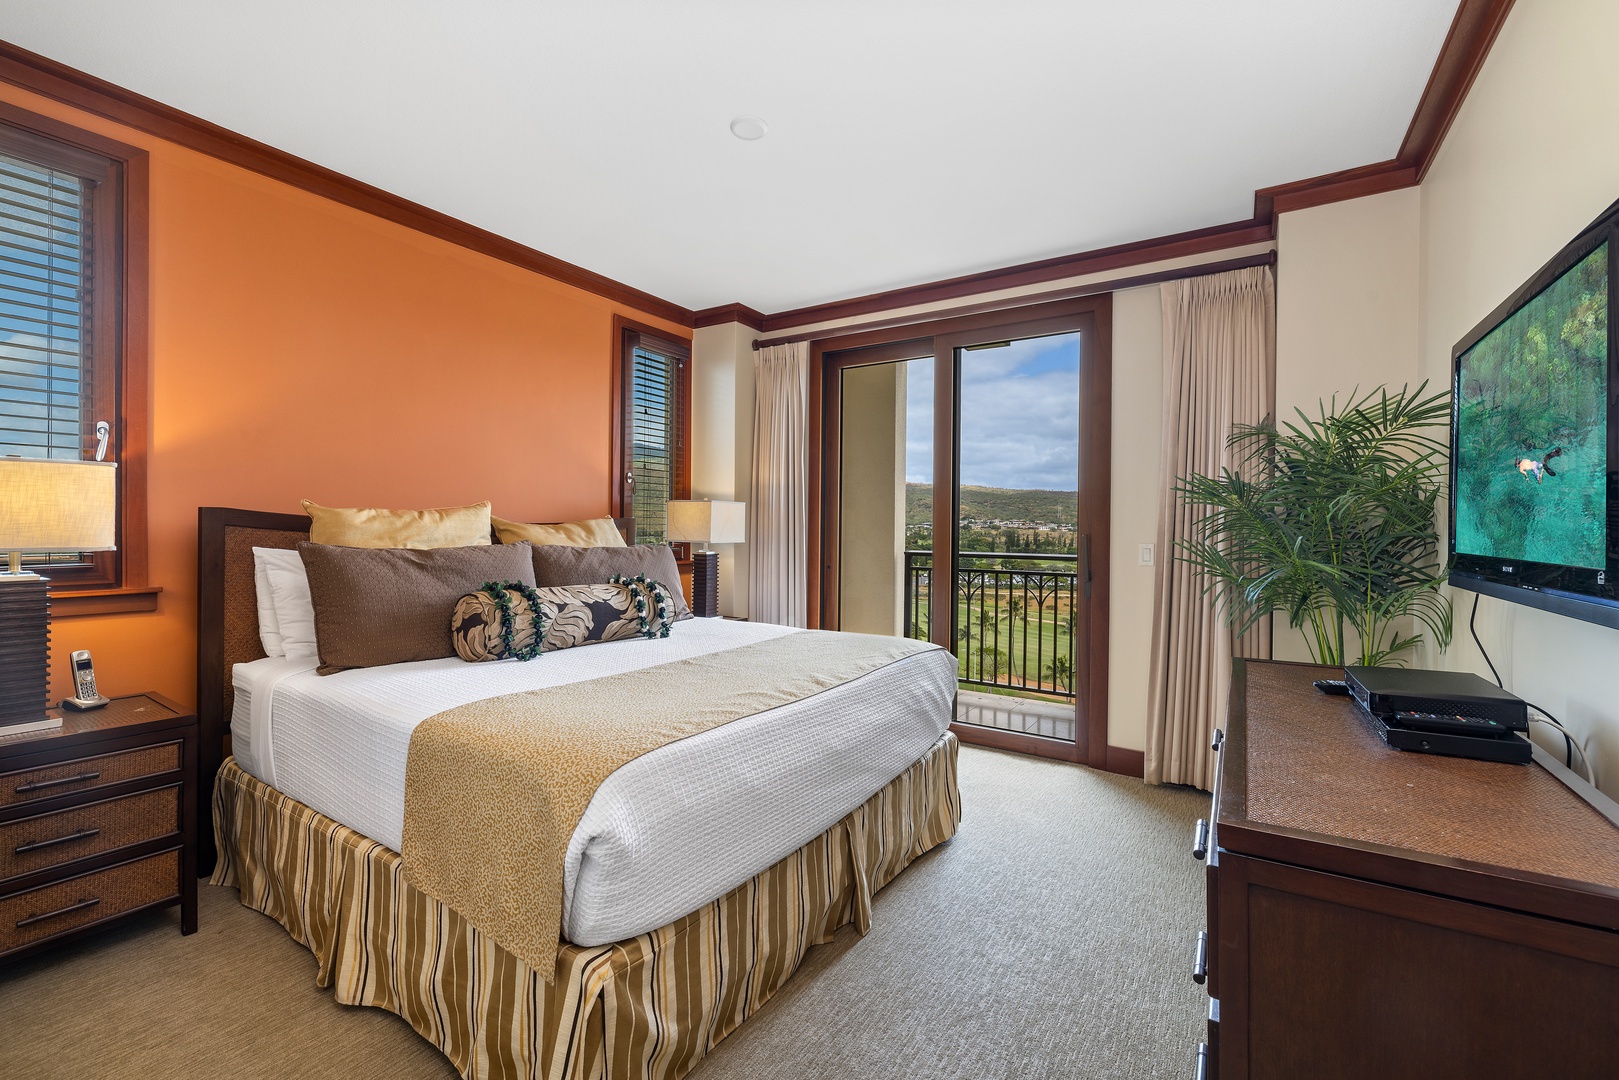 Kapolei Vacation Rentals, Ko Olina Beach Villas O1001 - The primary guest bedroom has a luxurious king bed, TV, central AC and a private lanai access.